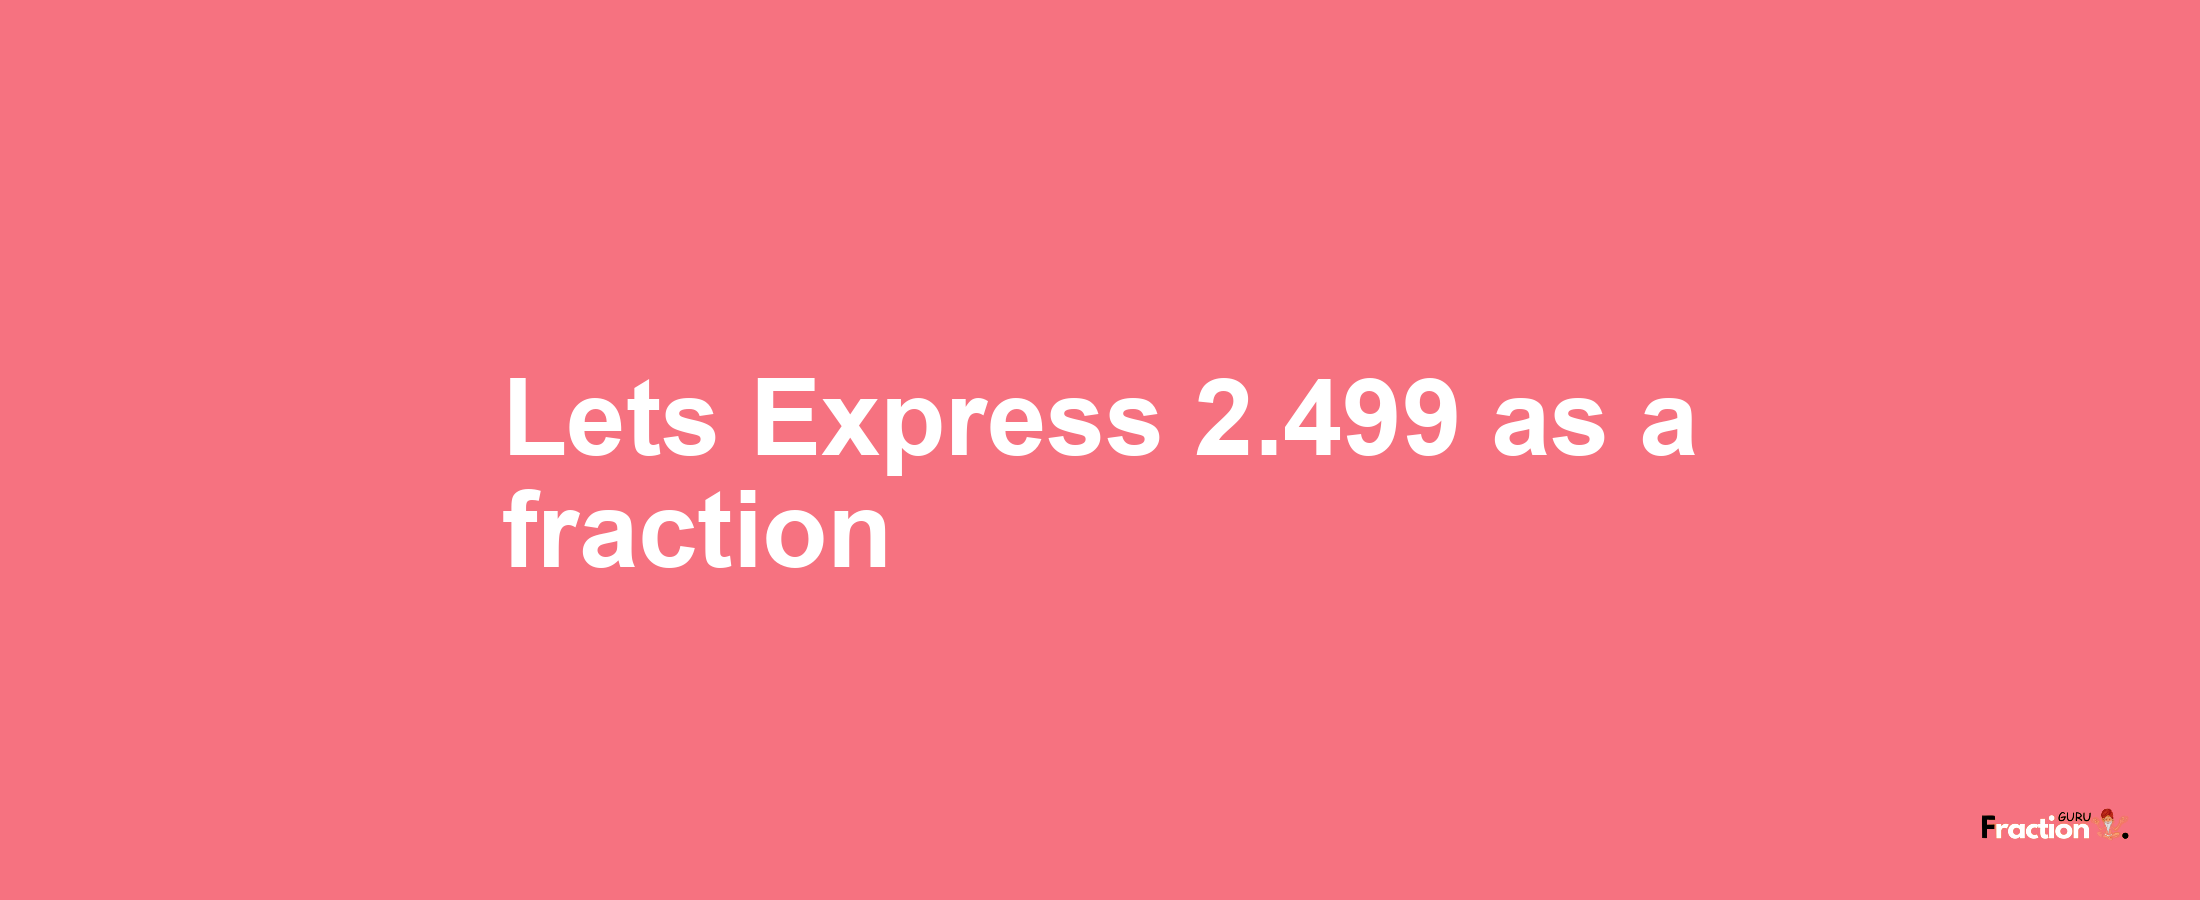 Lets Express 2.499 as afraction